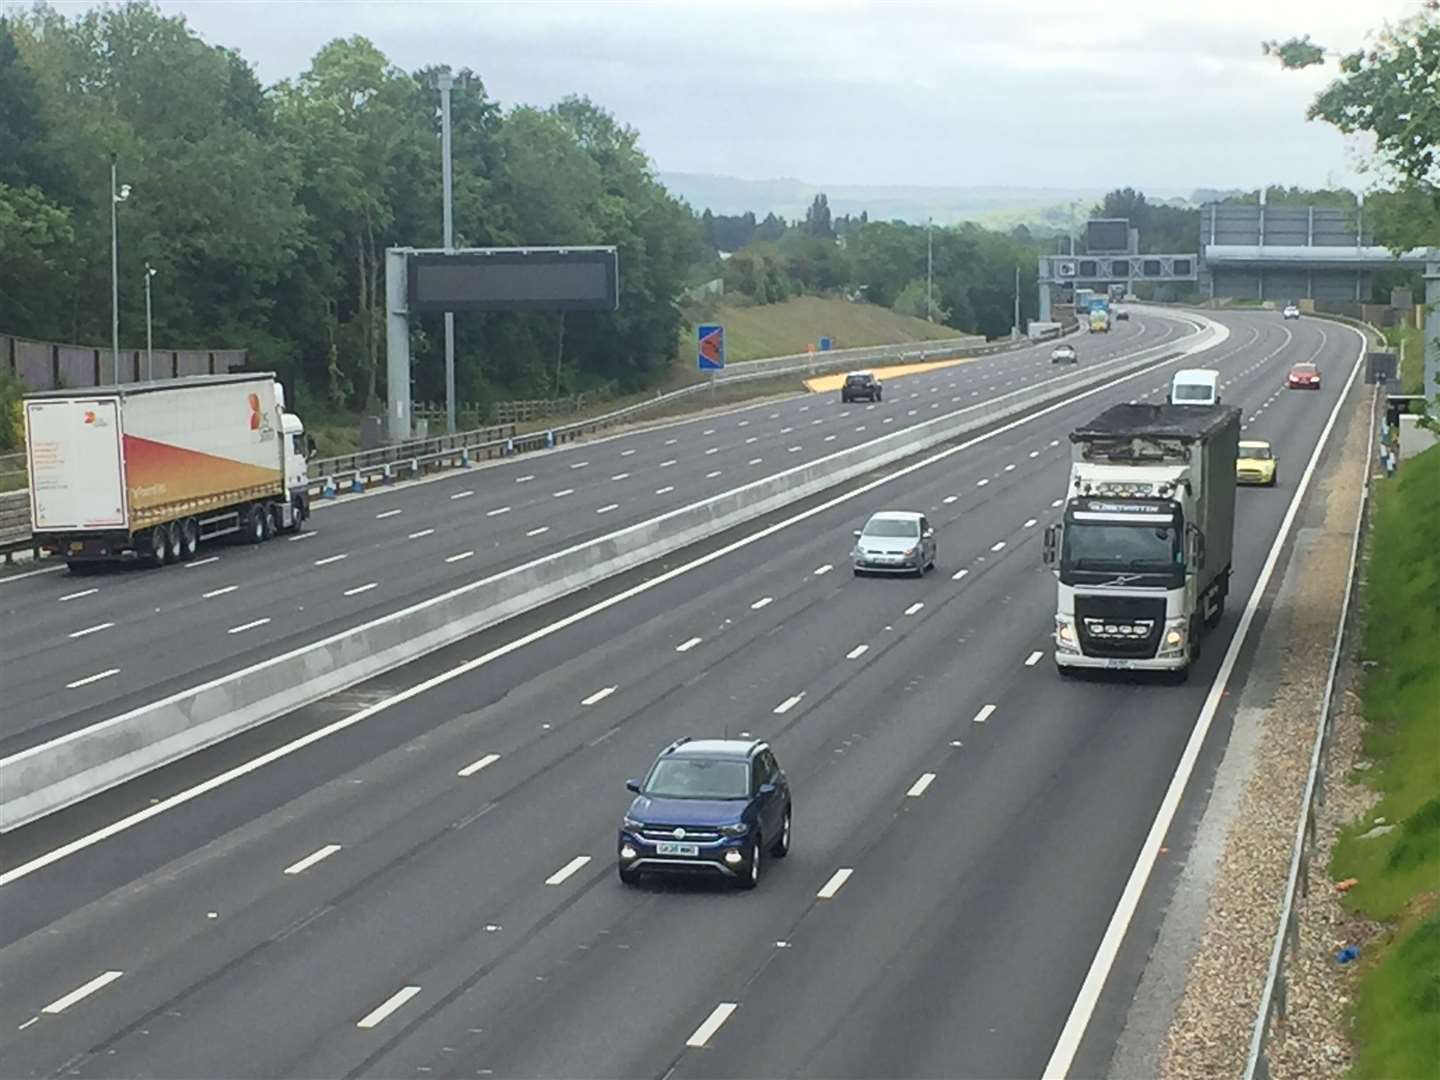 Work on creating a smart motorway on a stretch of the M20 was completed by spring 2020